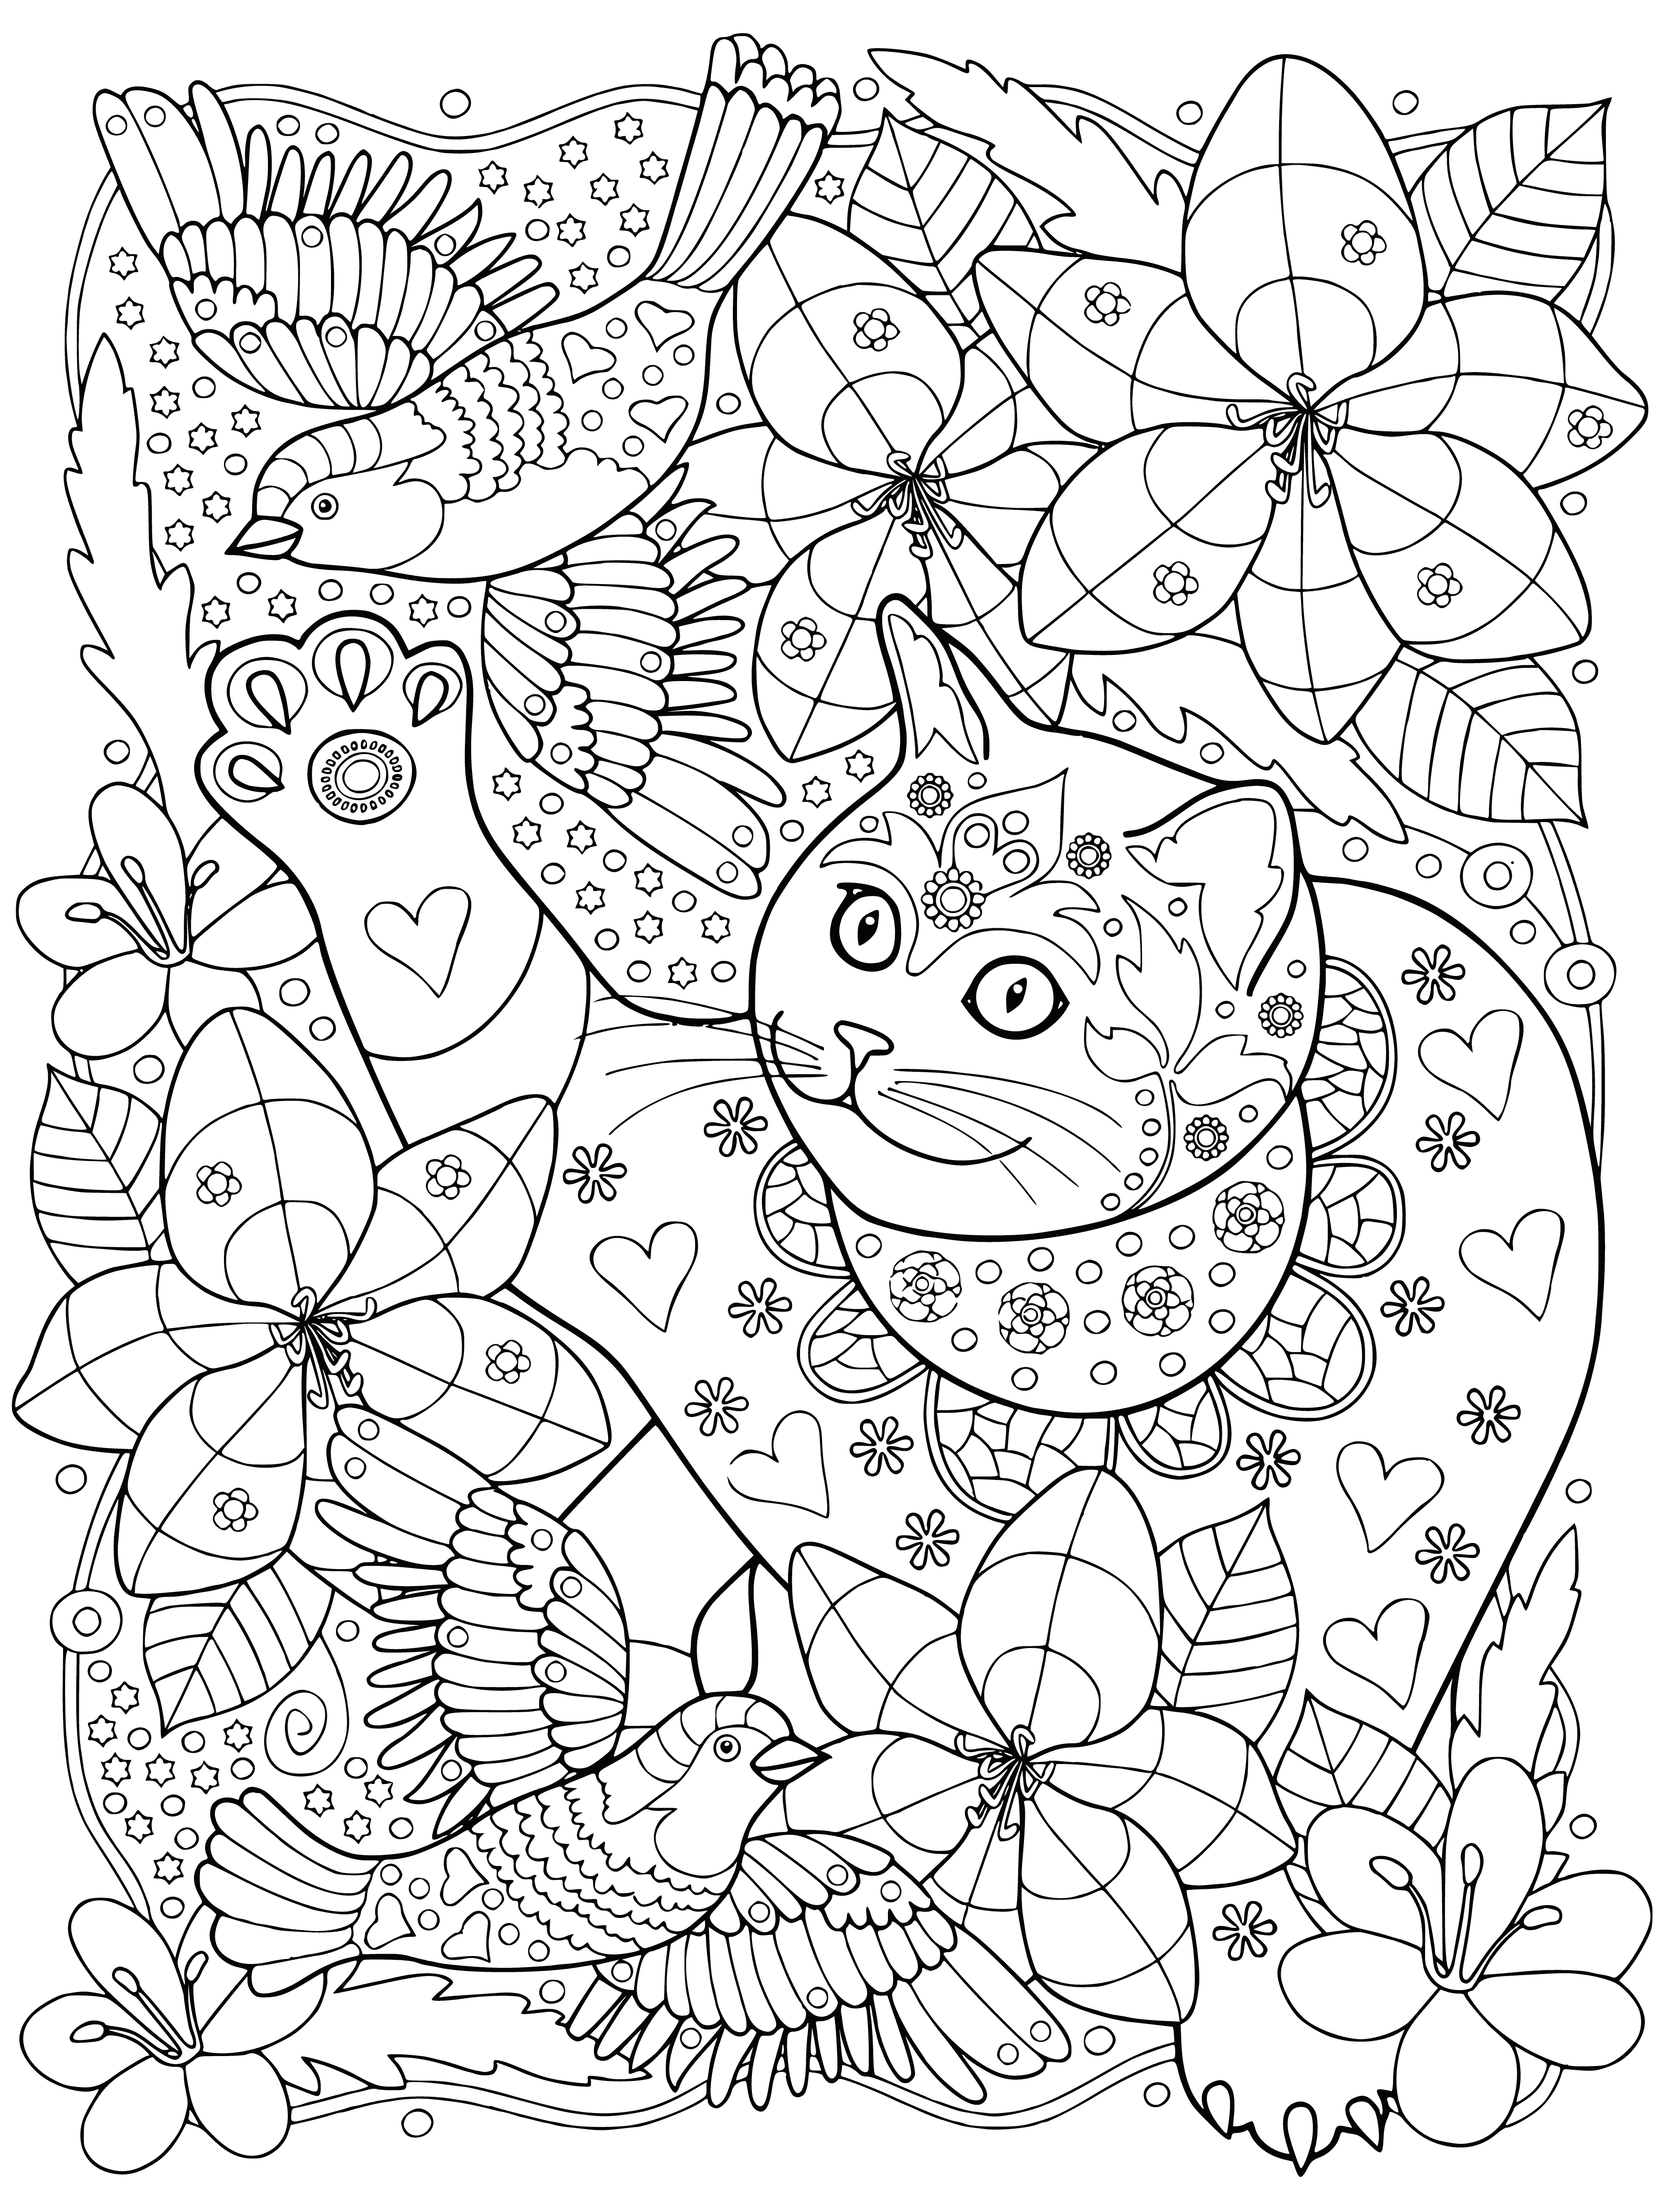 The cat watches the birds coloring page